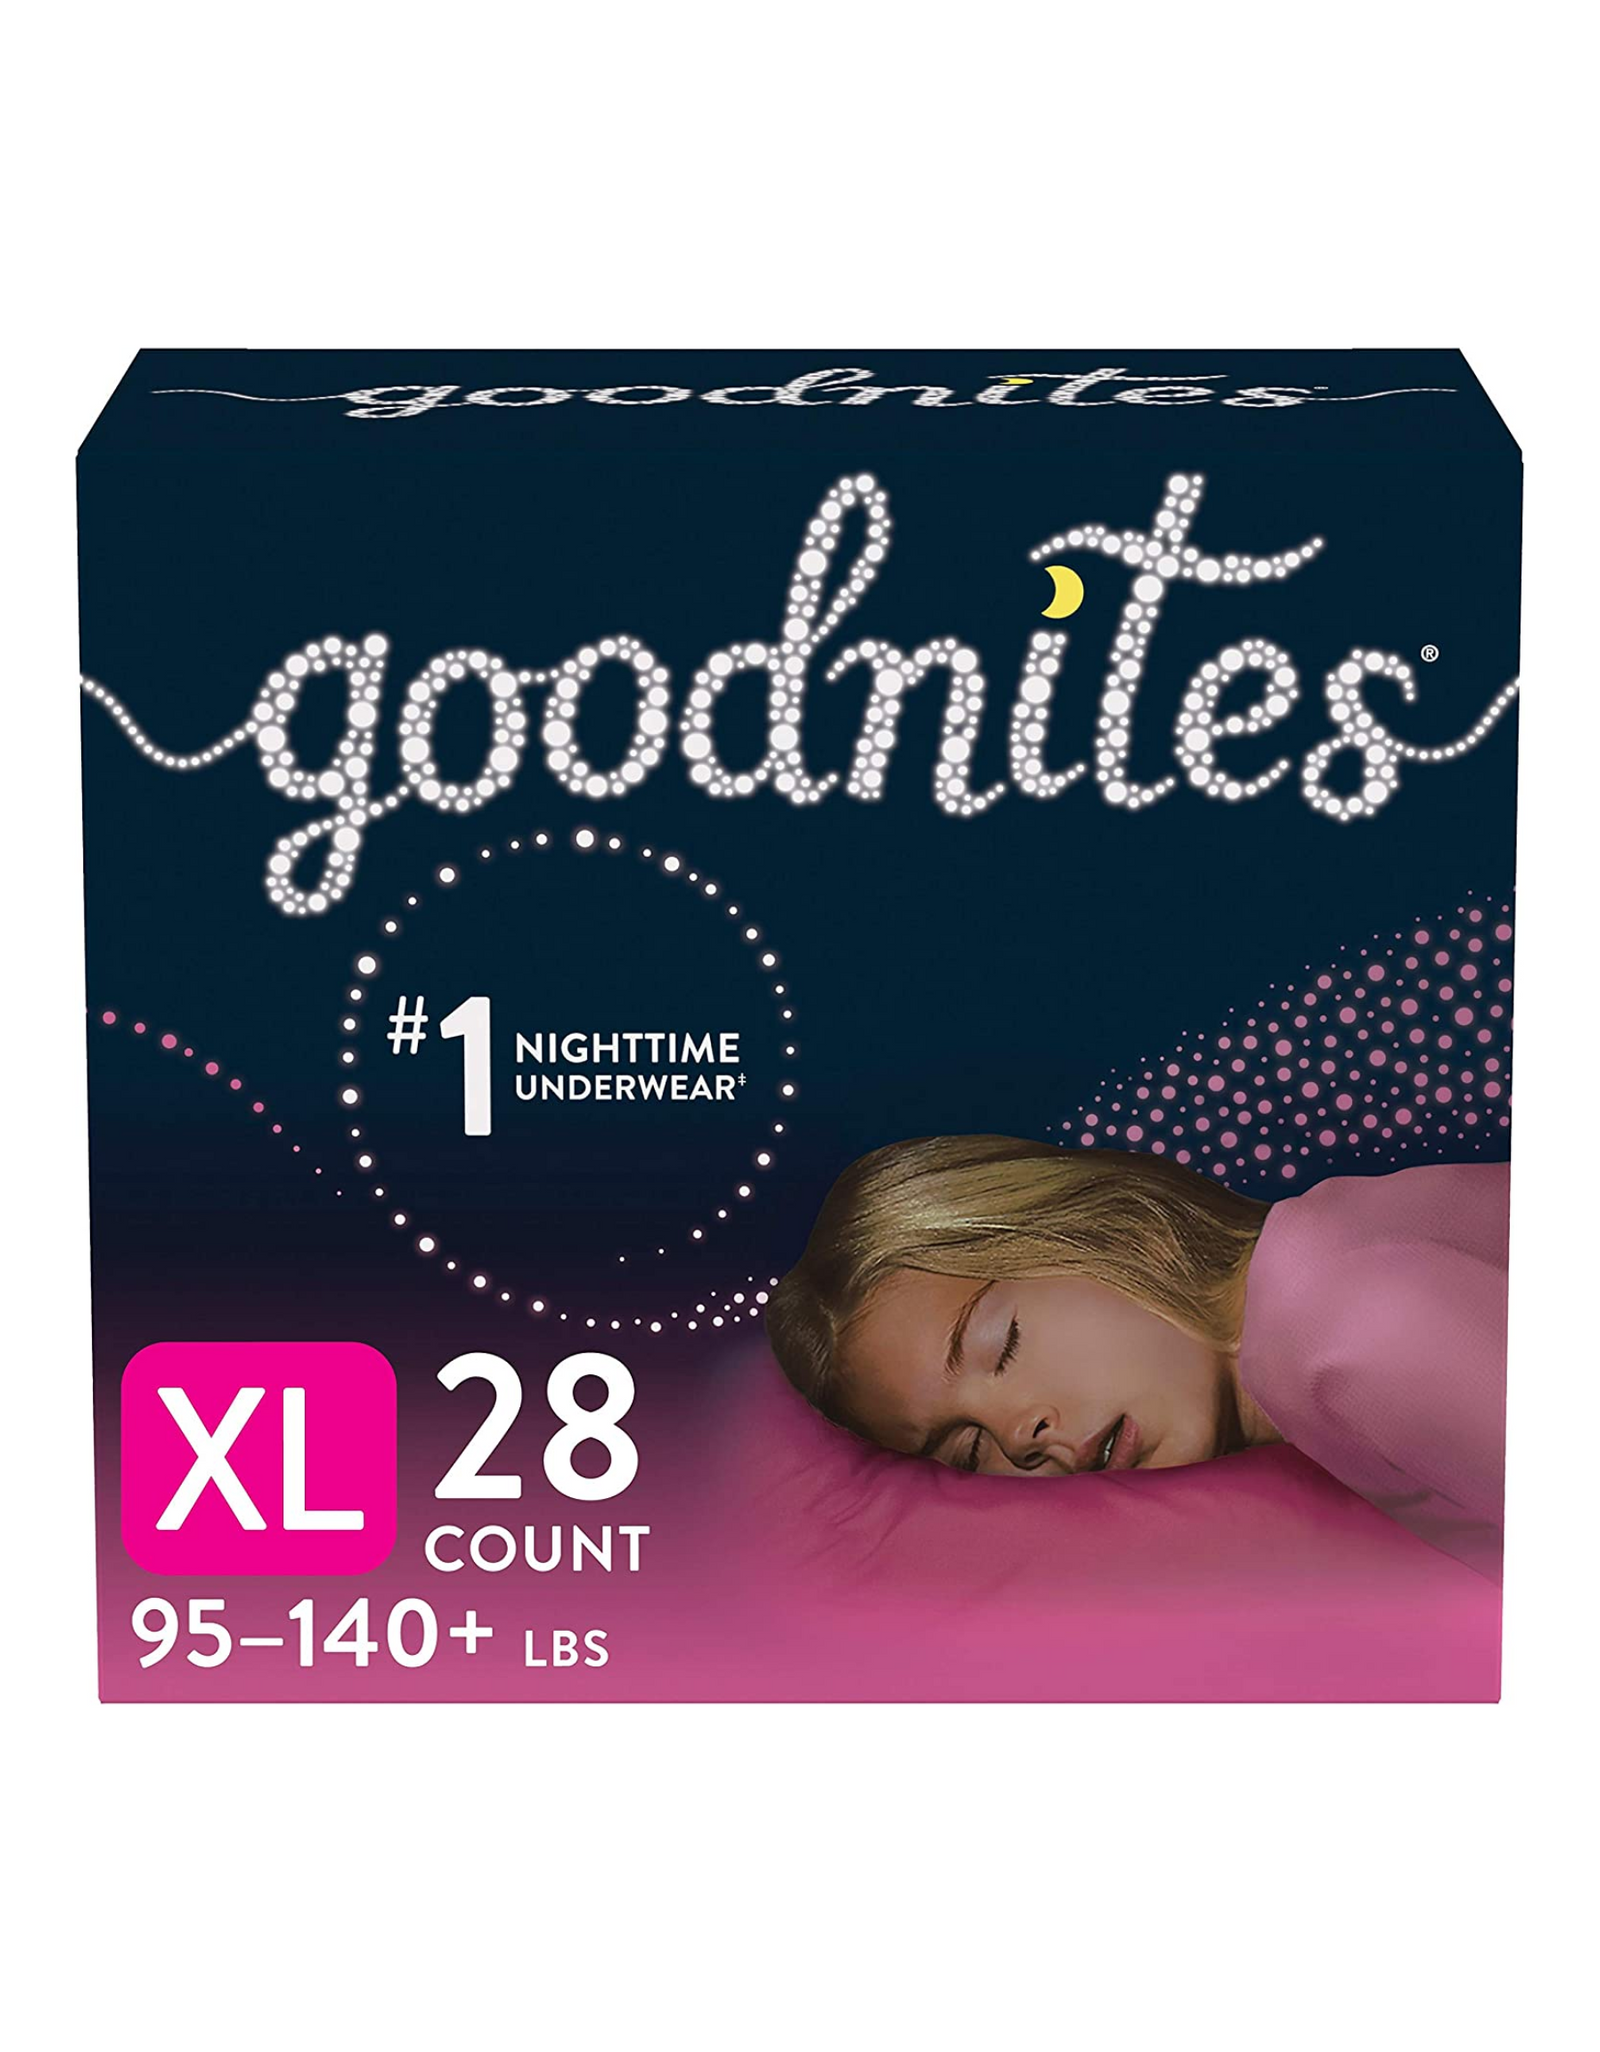 Goodnites Nighttime Bedwetting Underwear For Girls, X-Large, 28 Ct, 95-140 lb.